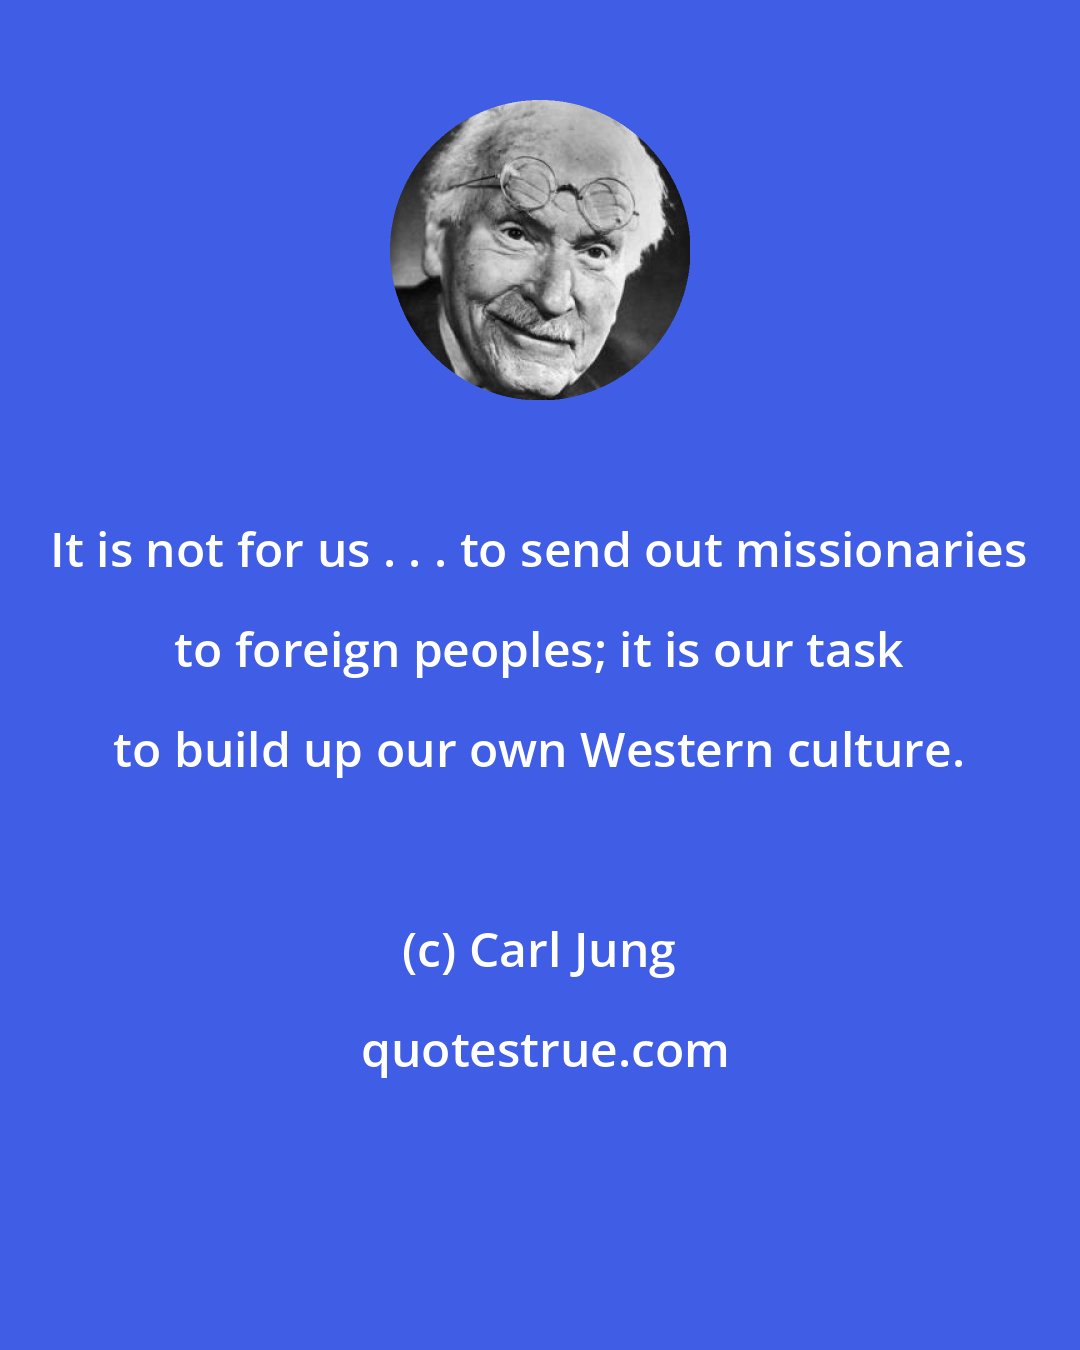 Carl Jung: It is not for us . . . to send out missionaries to foreign peoples; it is our task to build up our own Western culture.